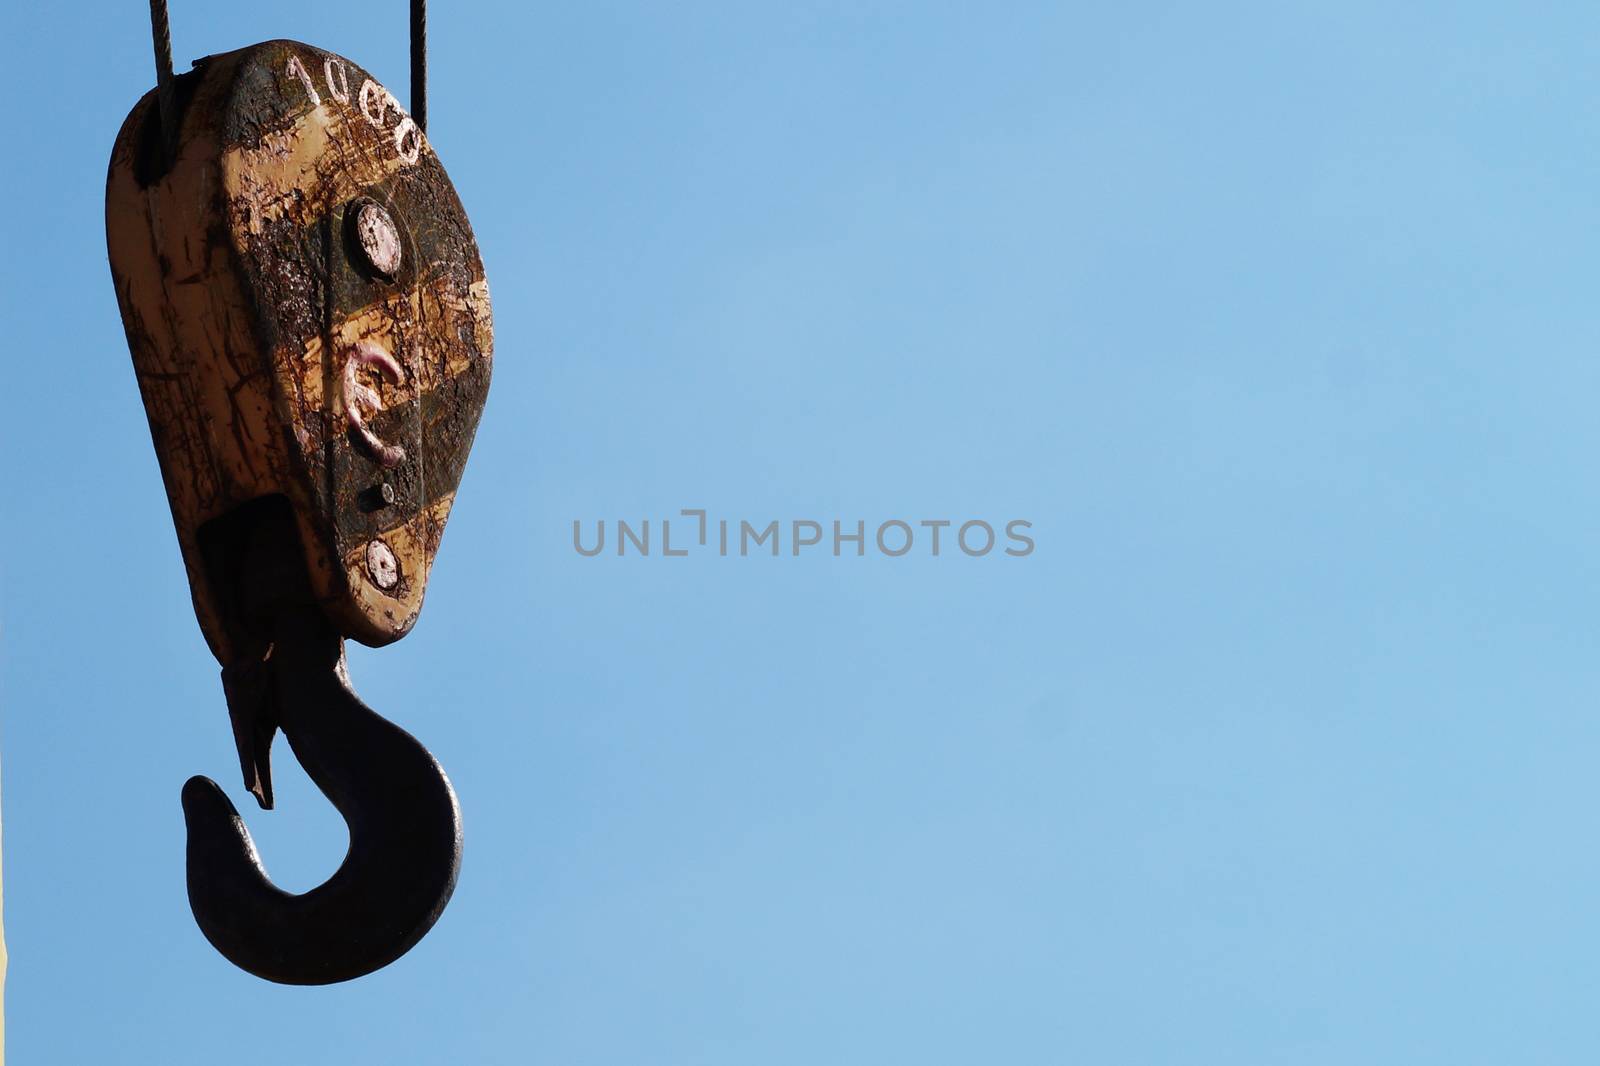 hook from the hoisting winch against the sky by Annado